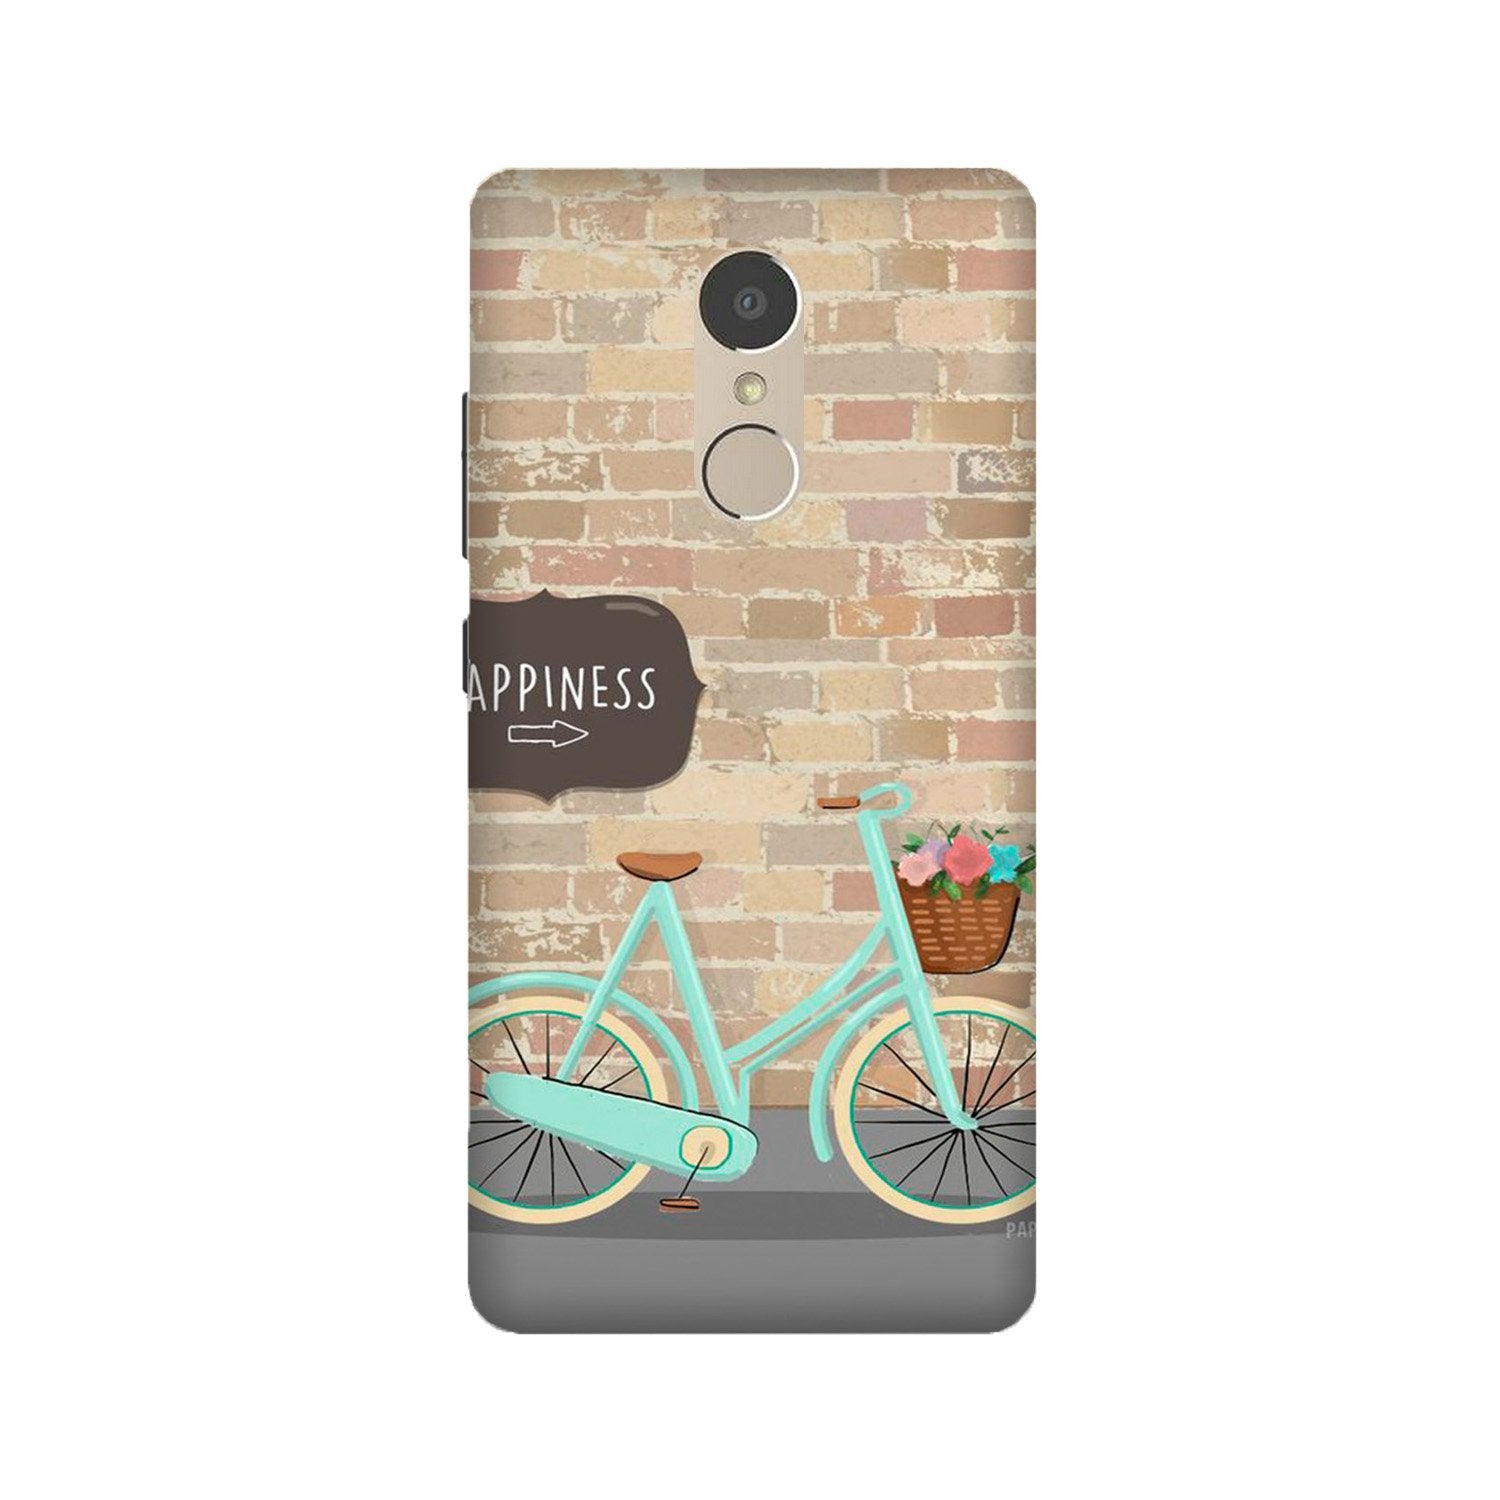 Happiness Case for Lenovo K6 Note